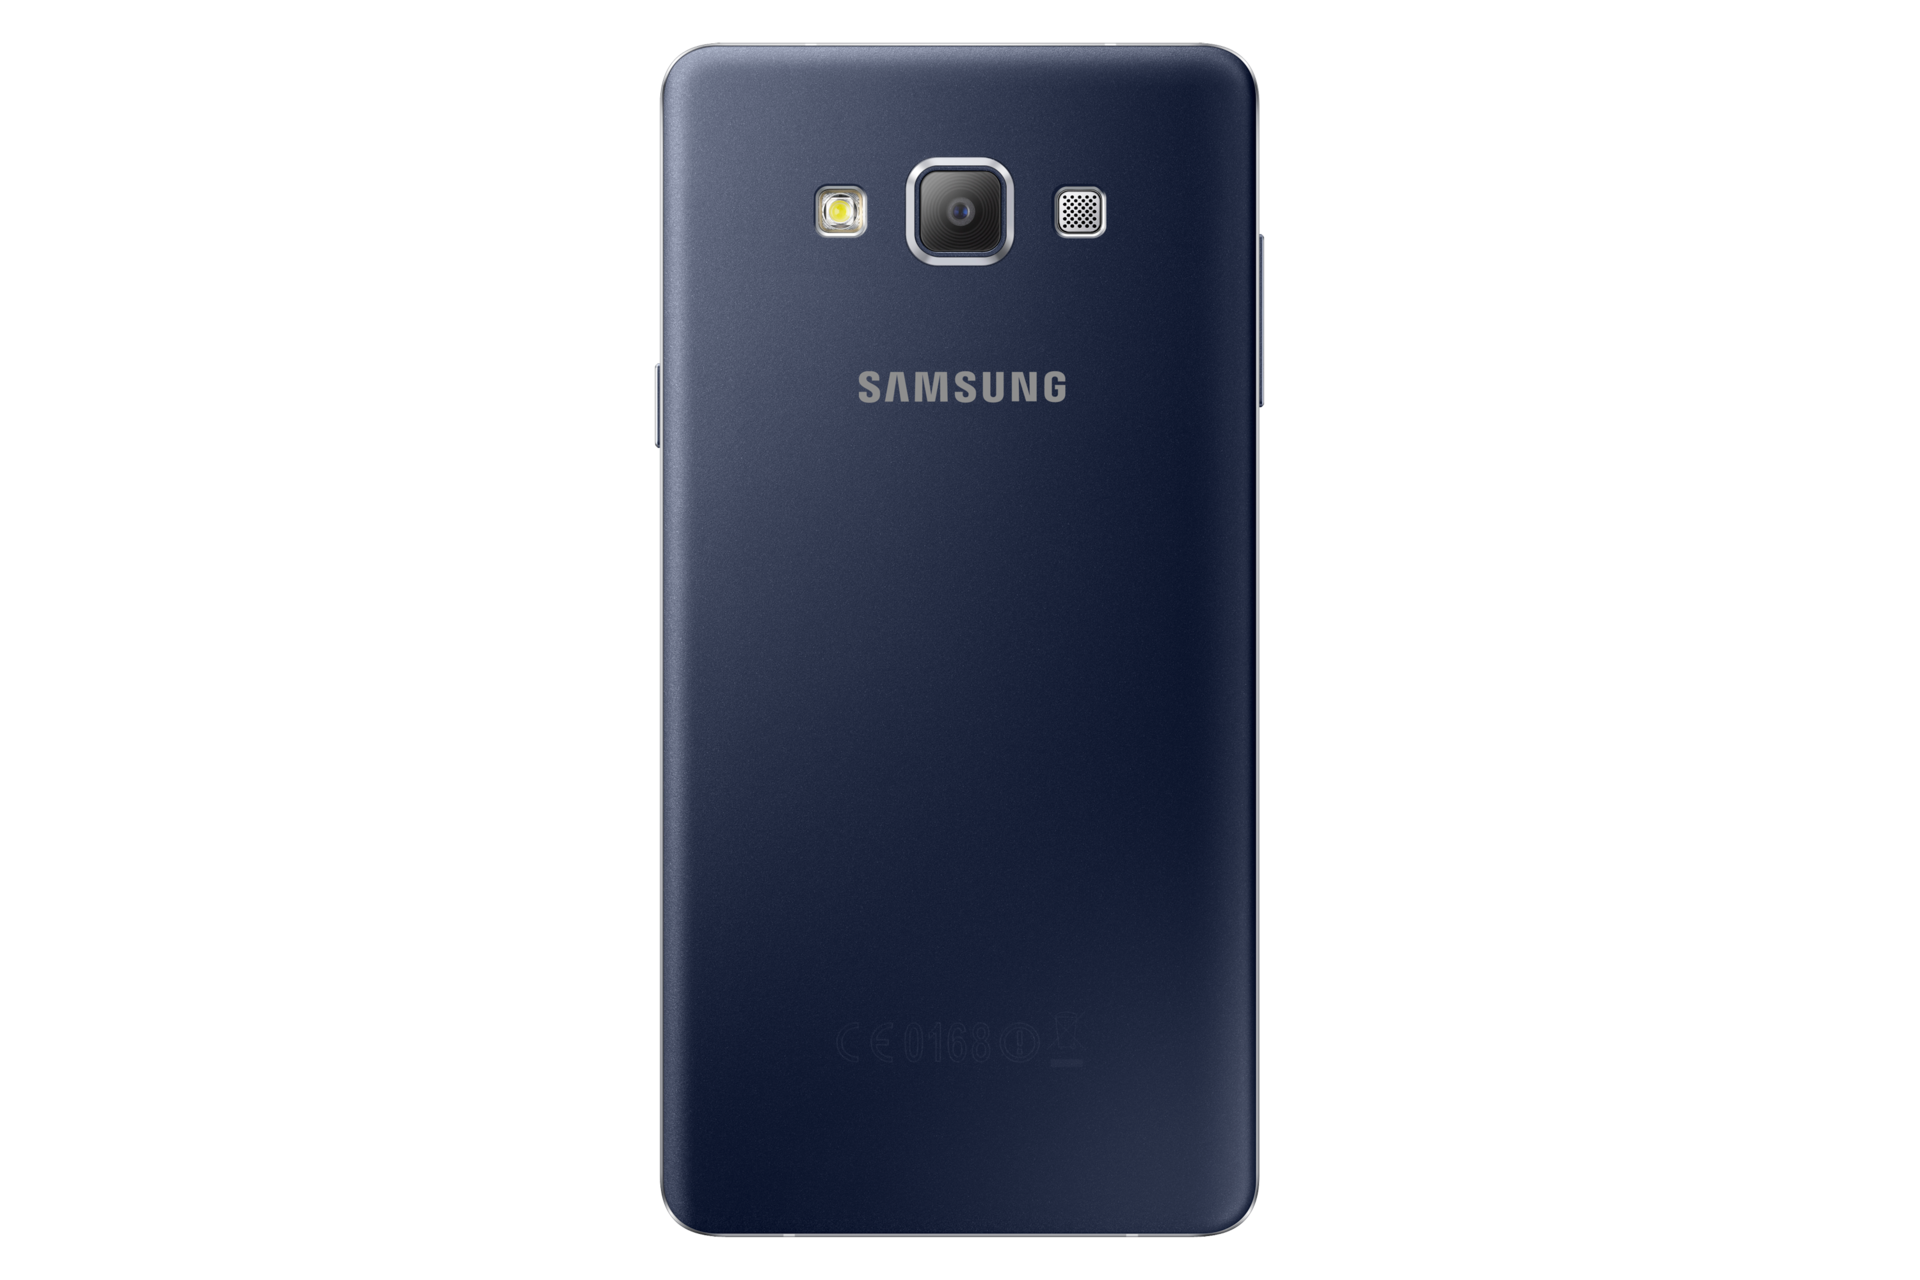 Samsung Galaxy A7 Price, New Galaxy A7 Features, Specs, Reviews, Metal Dual Sim Phone